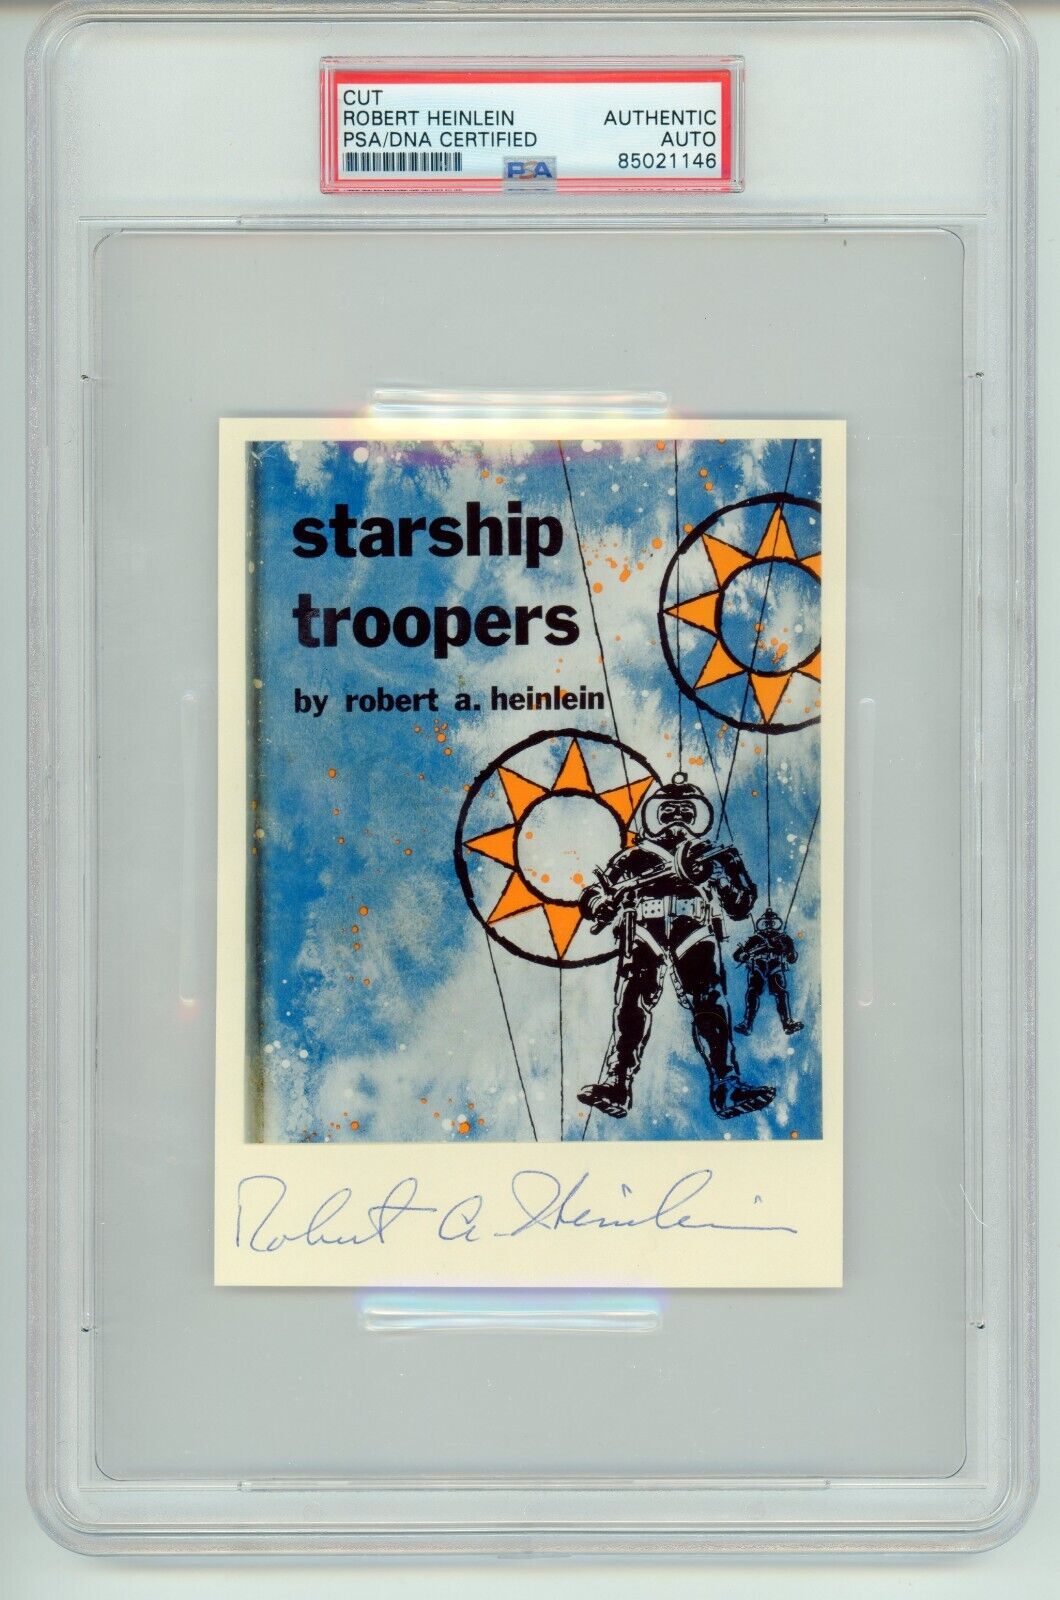 Robert A. Heinlein ~ Signed Autographed Starship Troopers ~ PSA DNA Encased